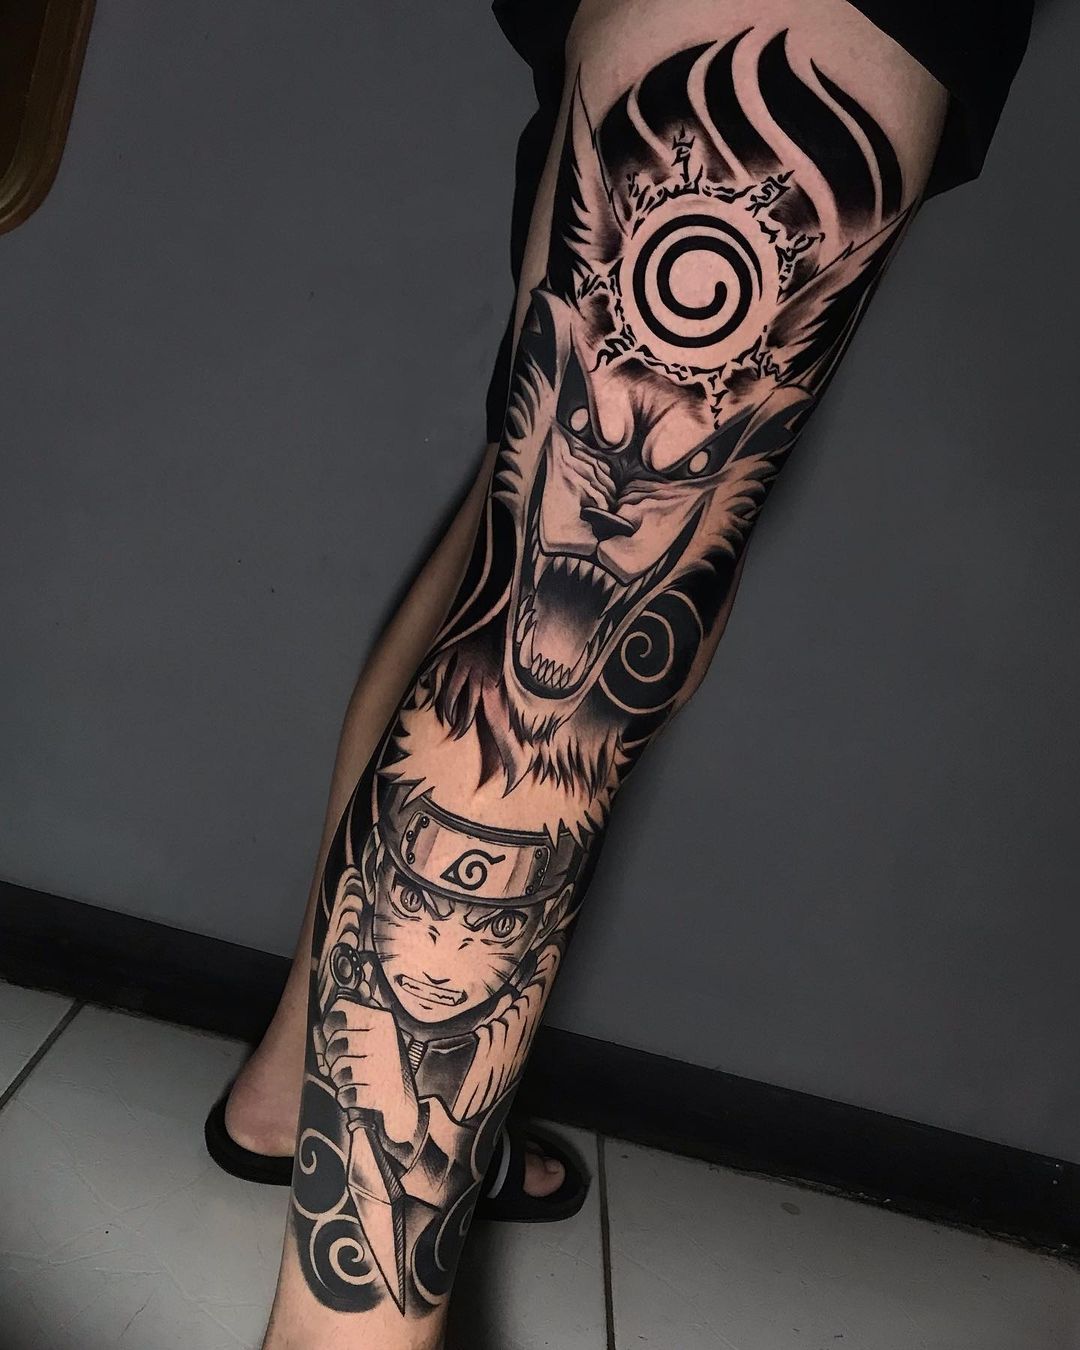 15 Incredible Naruto Tattoo Ideas That Will Leave You Inspired